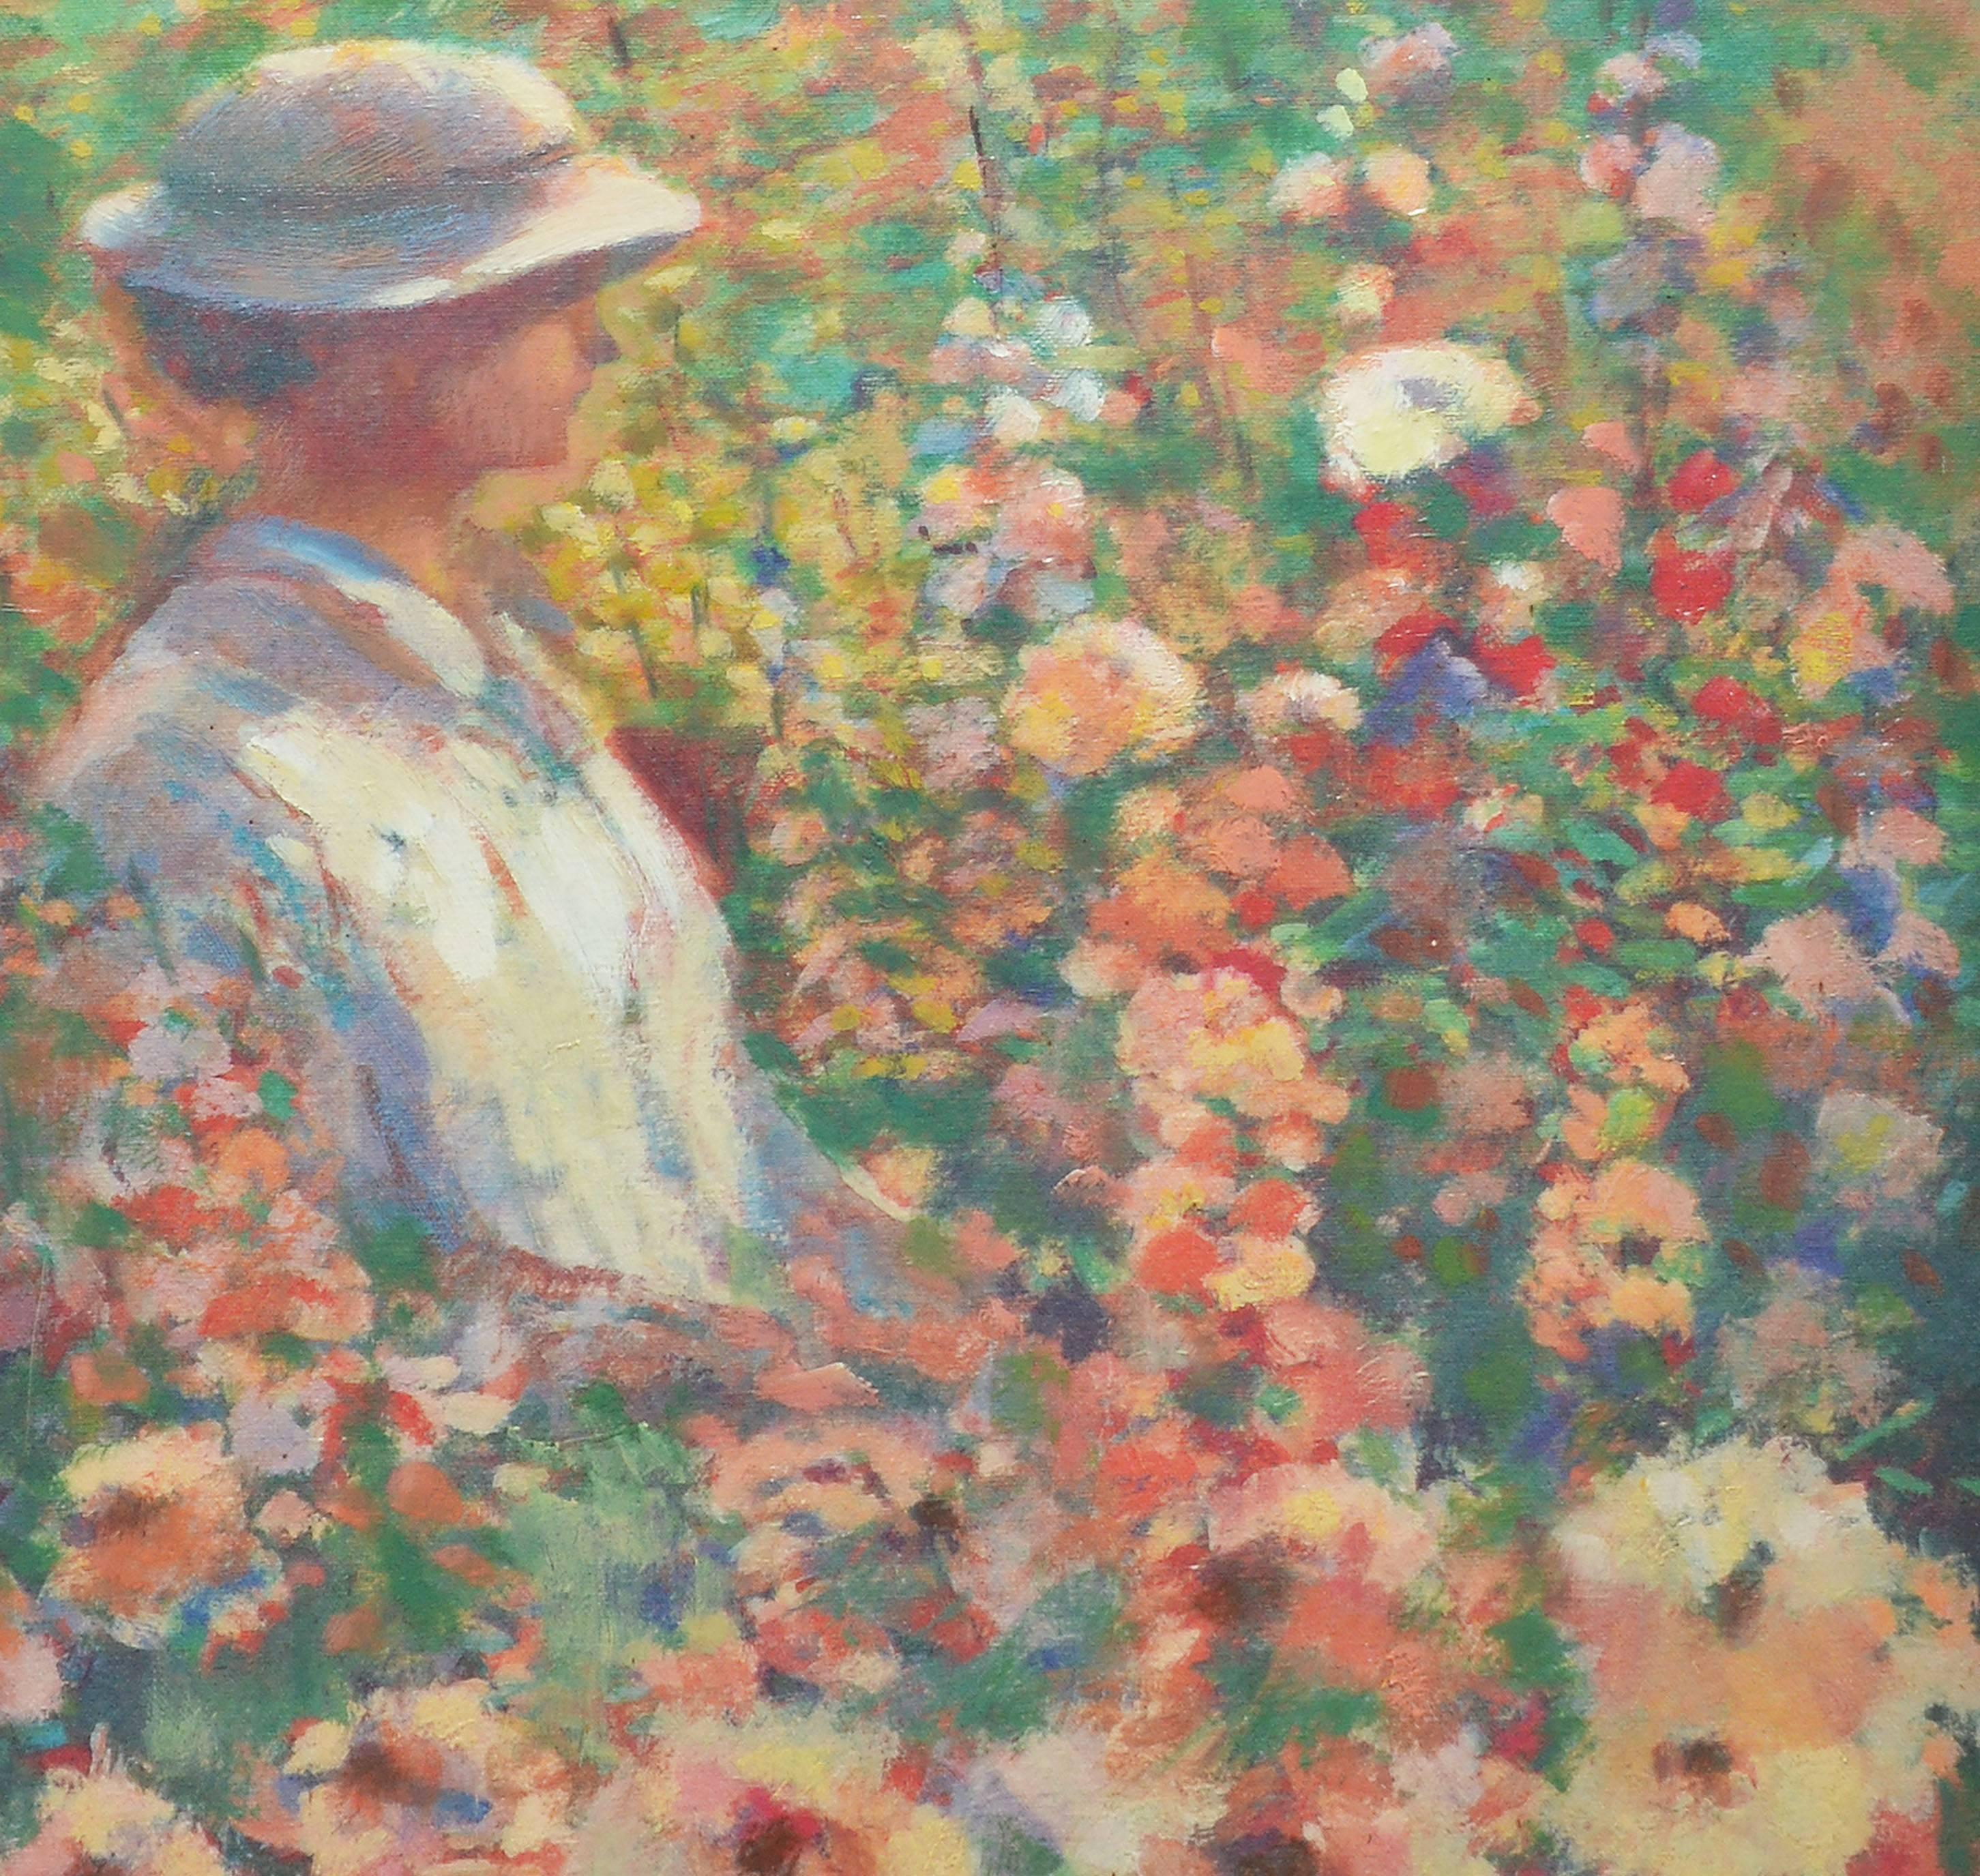 Portrait among the Hollyhocks, by Donald Roy Purdy 2